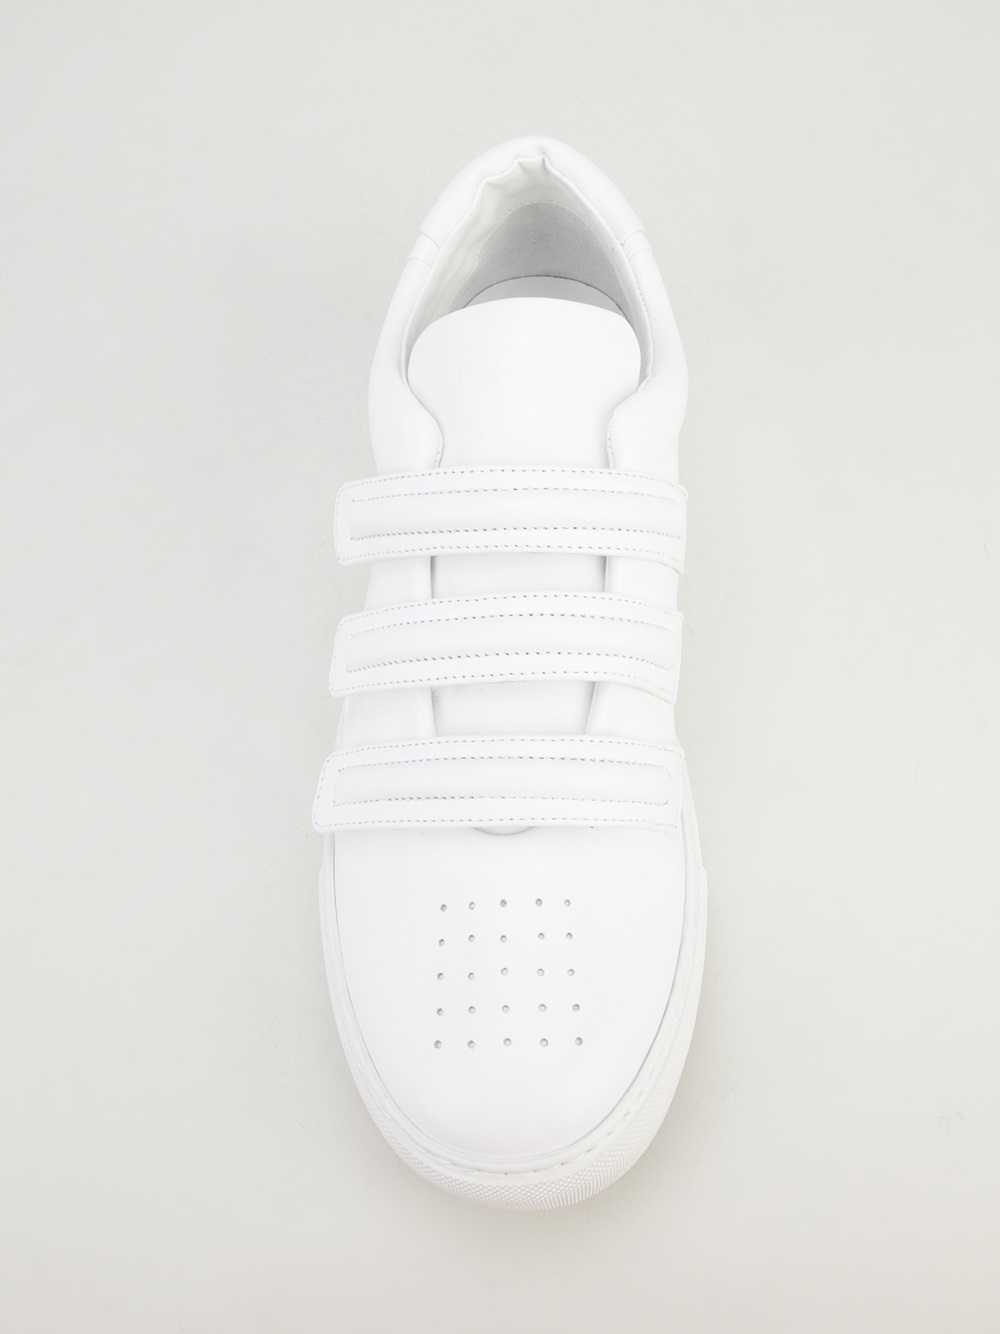 Givenchy Velcro Sneakers in White for Men - Lyst